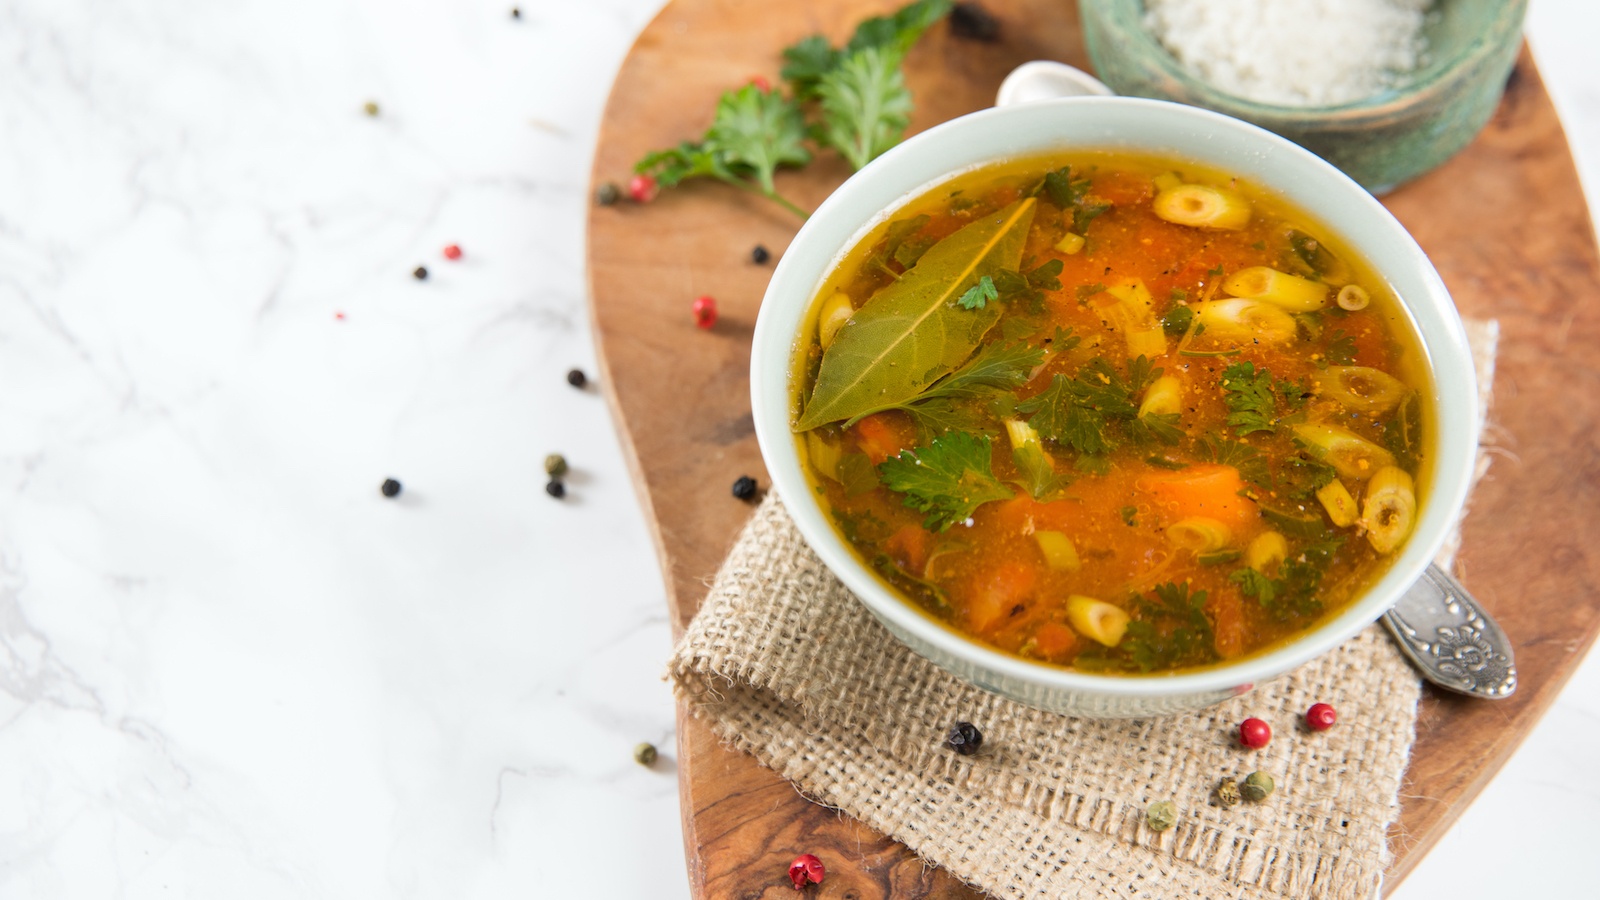 How to Make Your Own Healing Veggie Broth